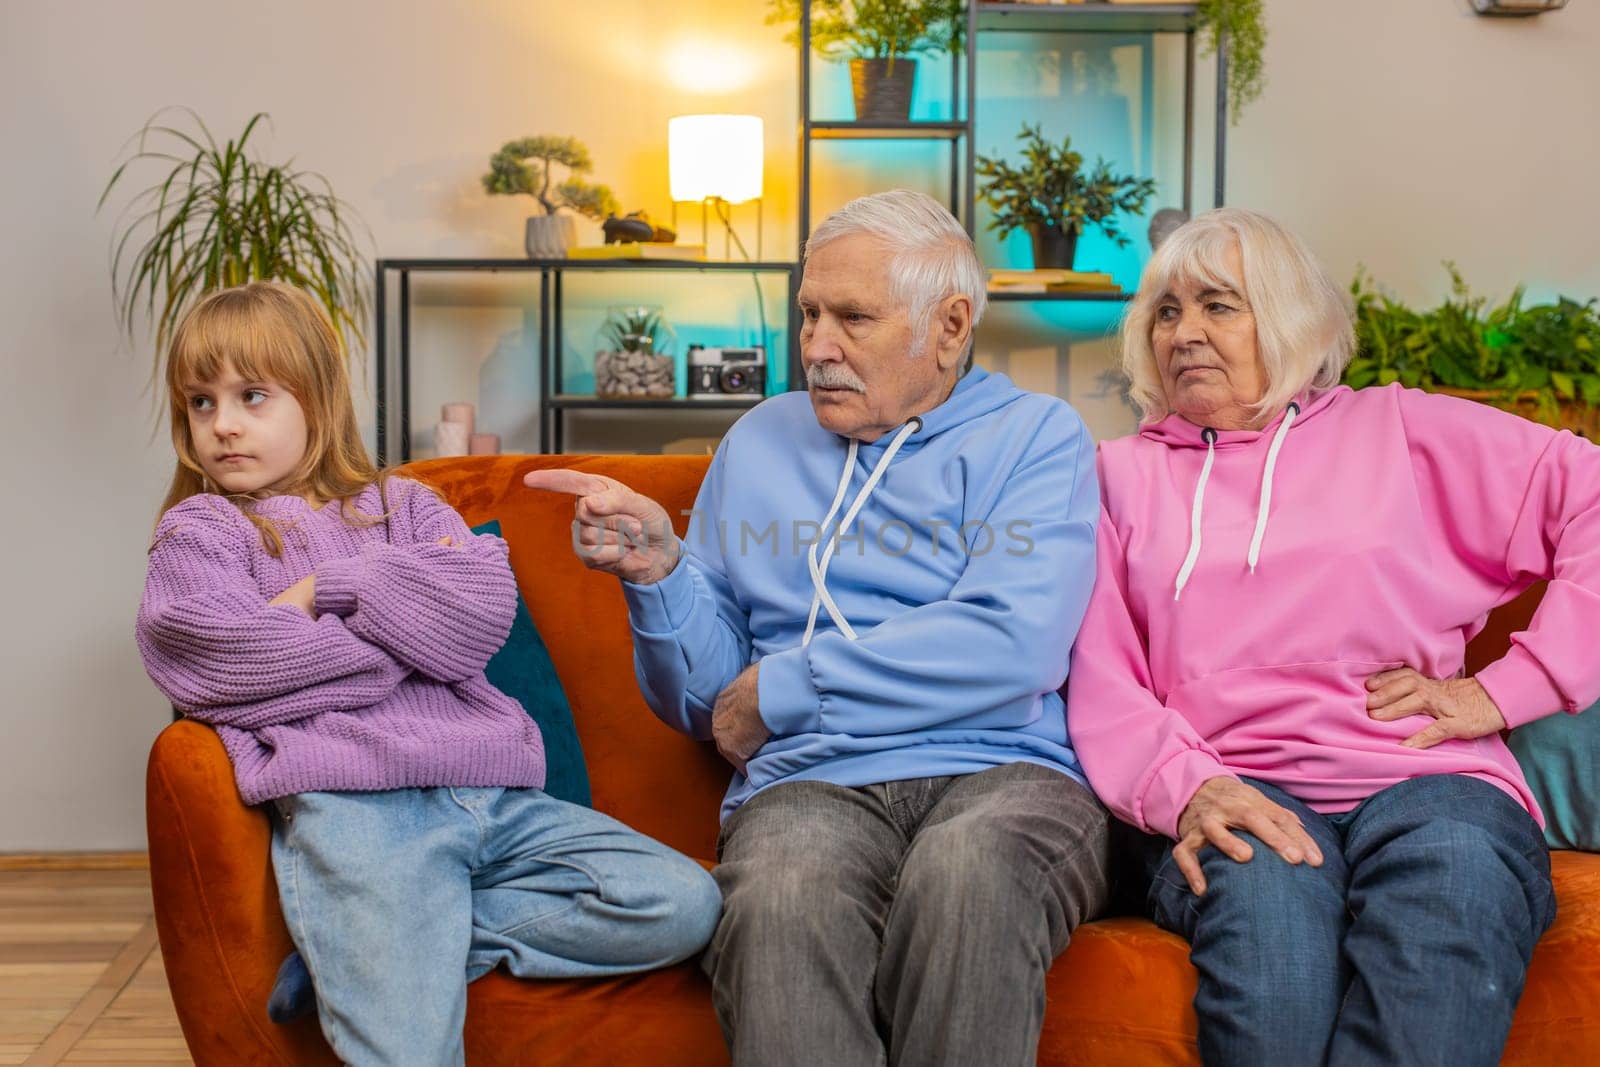 Irritated grandfather and grandmother scolding granddaughter child kid for bad behavior on home sofa by efuror